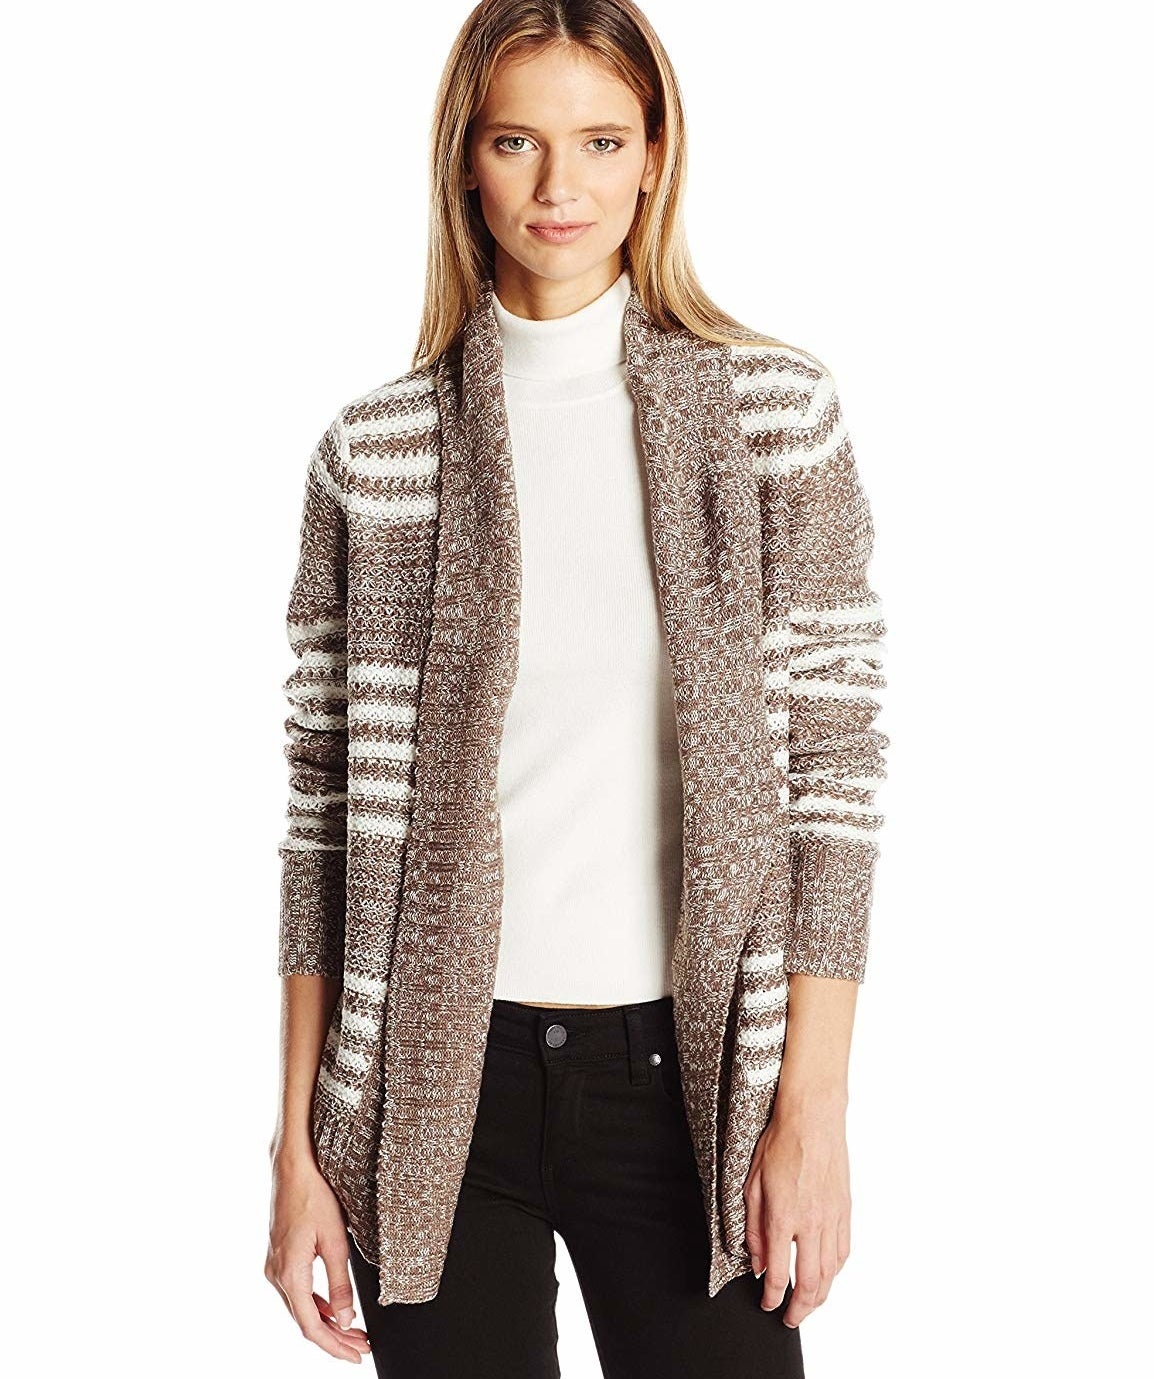 18 Of The Best Cardigans You Can Get On Amazon